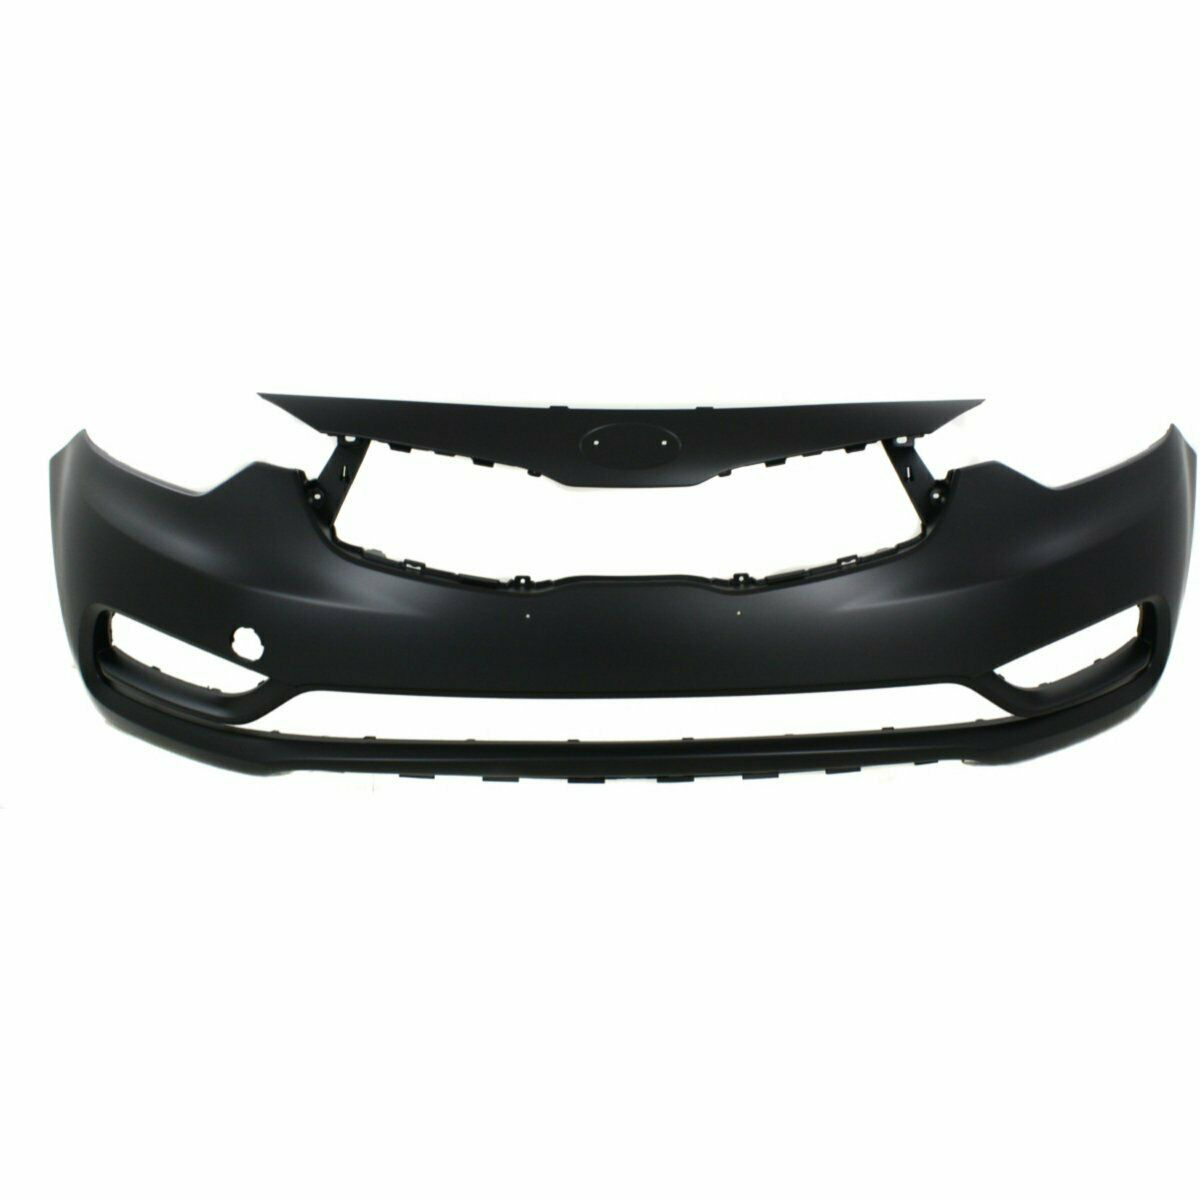 2014-2016 Kia Forte Sedan Front Bumper Painted to Match